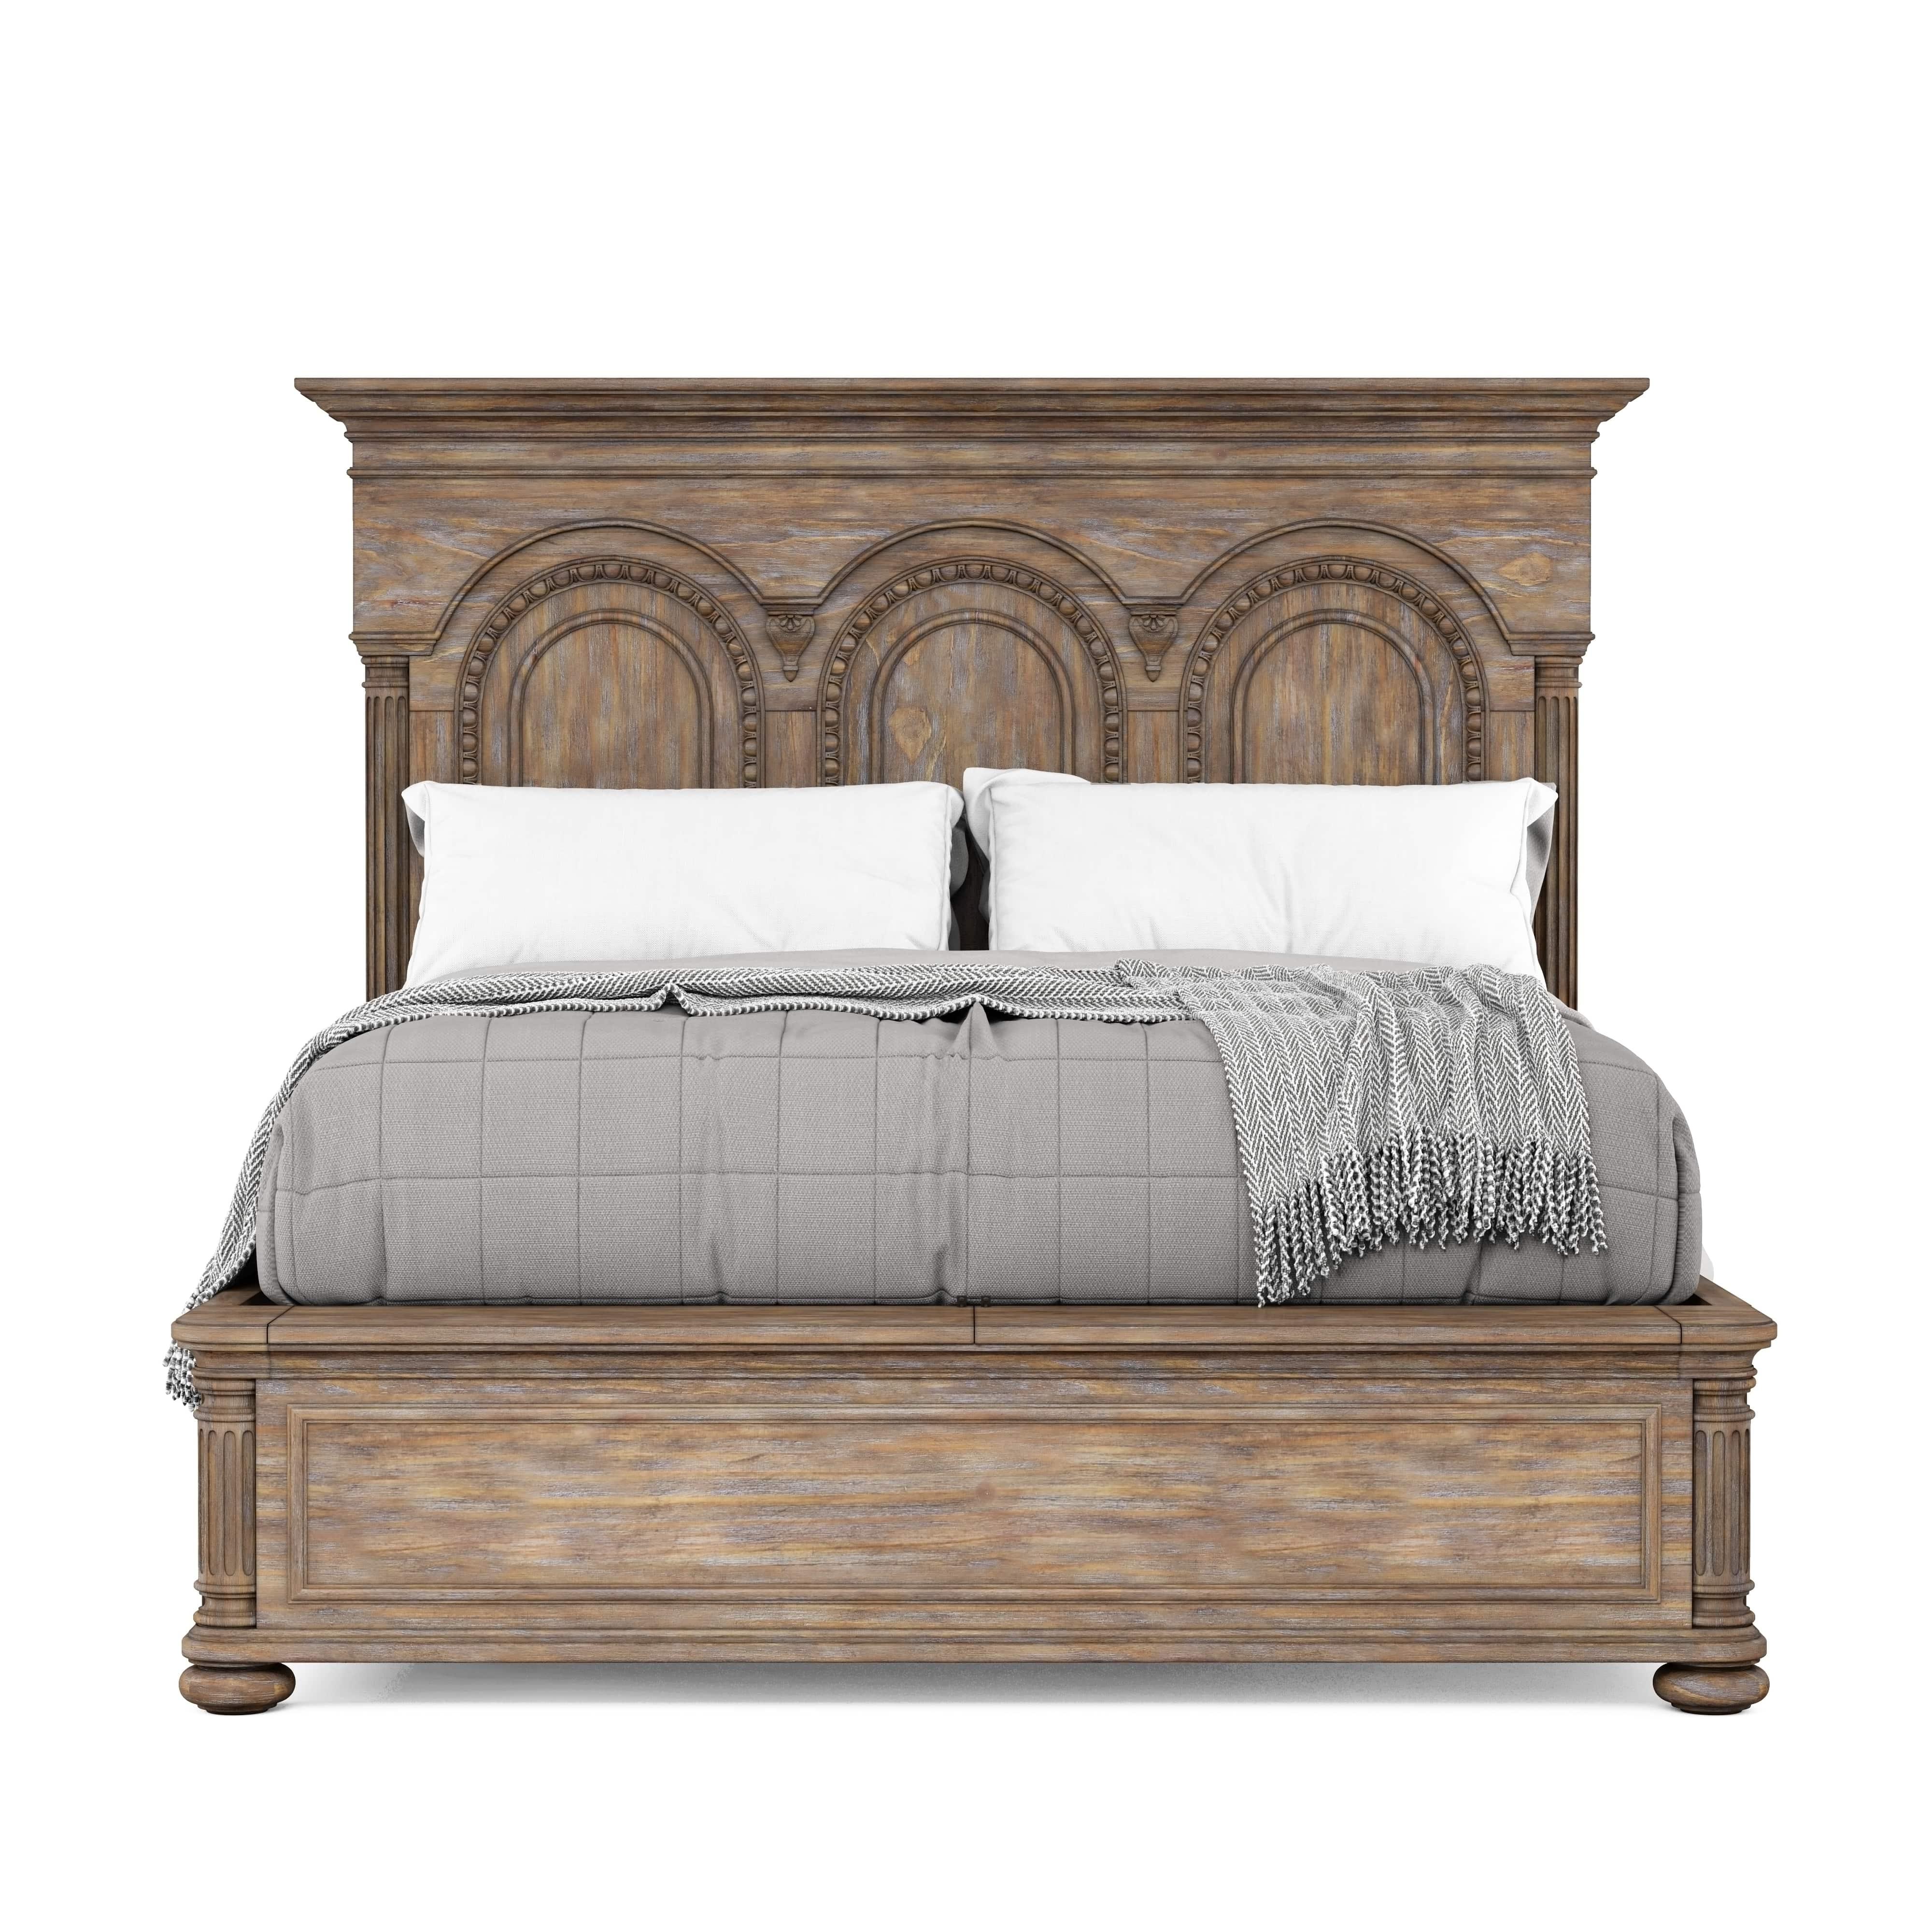 Traditional, Farmhouse Panel Bed Architrave 277137-2608 in Brown 